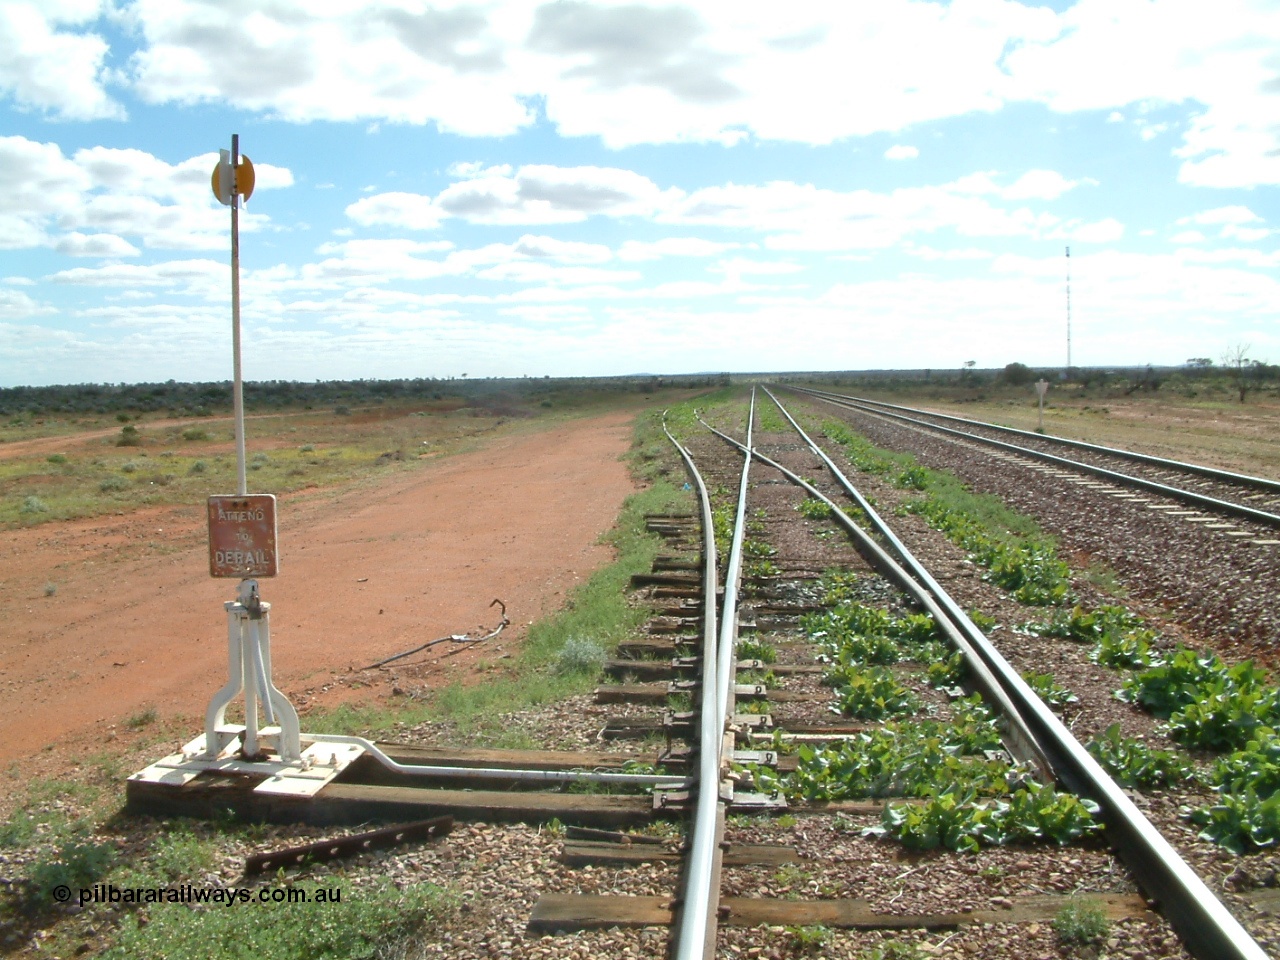 030415 150258
Ferguson, located at the 469 km on the Trans Australian Railway, looking west along the 1800 metre long crossing loop, siding point work on timber sleepers for goods siding with cattle race. [url=https://goo.gl/maps/XNaMGCNxZ4yv7Lrr9]GeoData location[/url].
